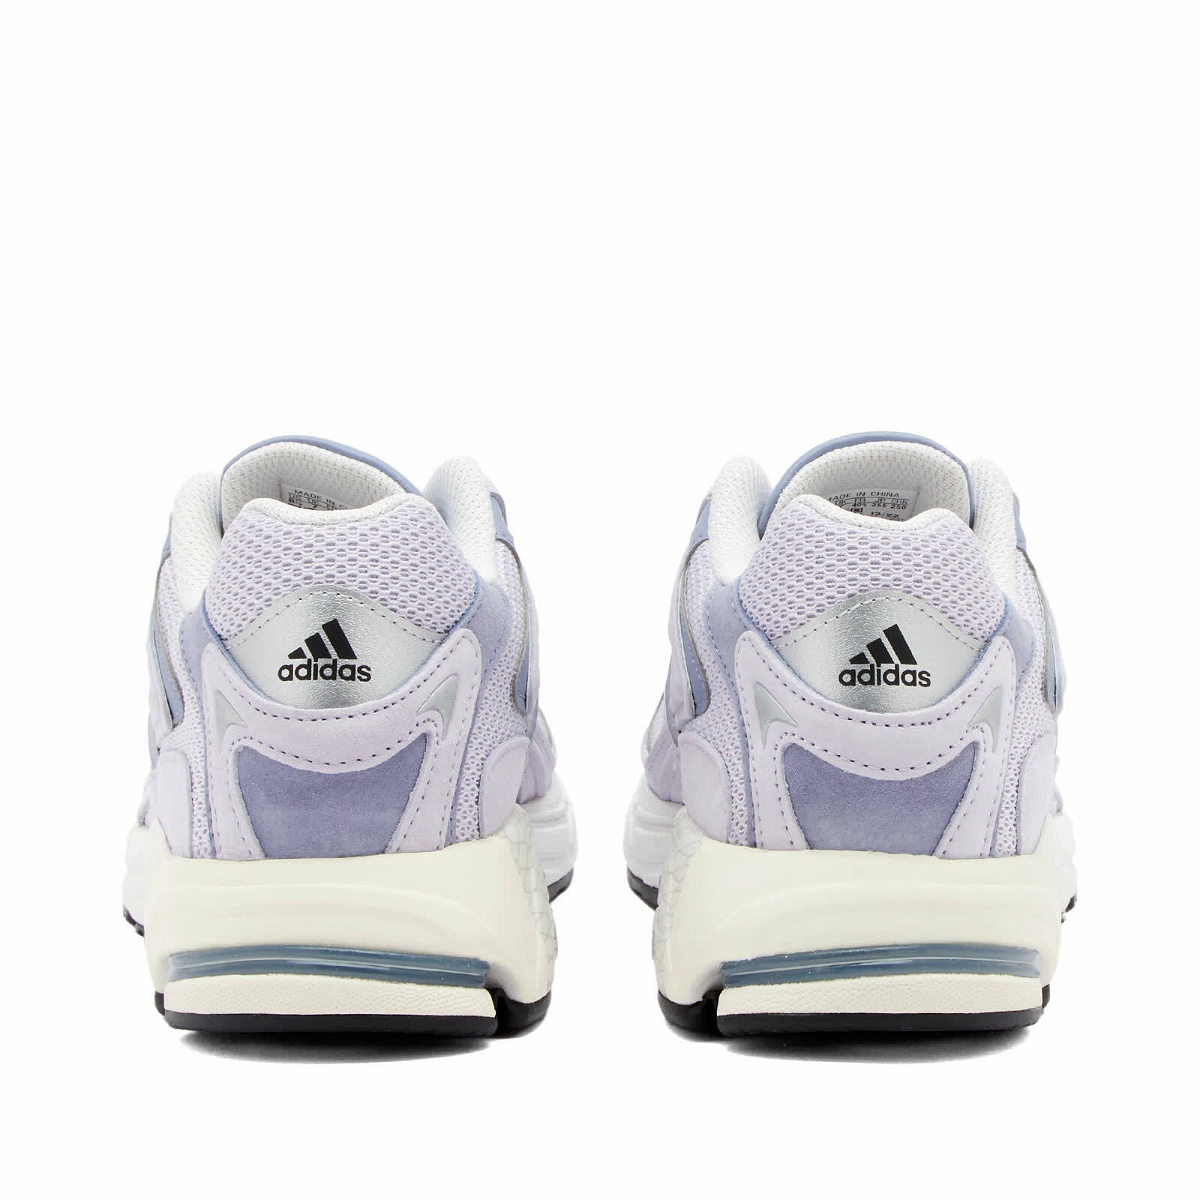 Realisierung extrem niedriger Preise Adidas Women\'s Response adidas Silver Sneakers Dawn/Violet/Crystal W in CL